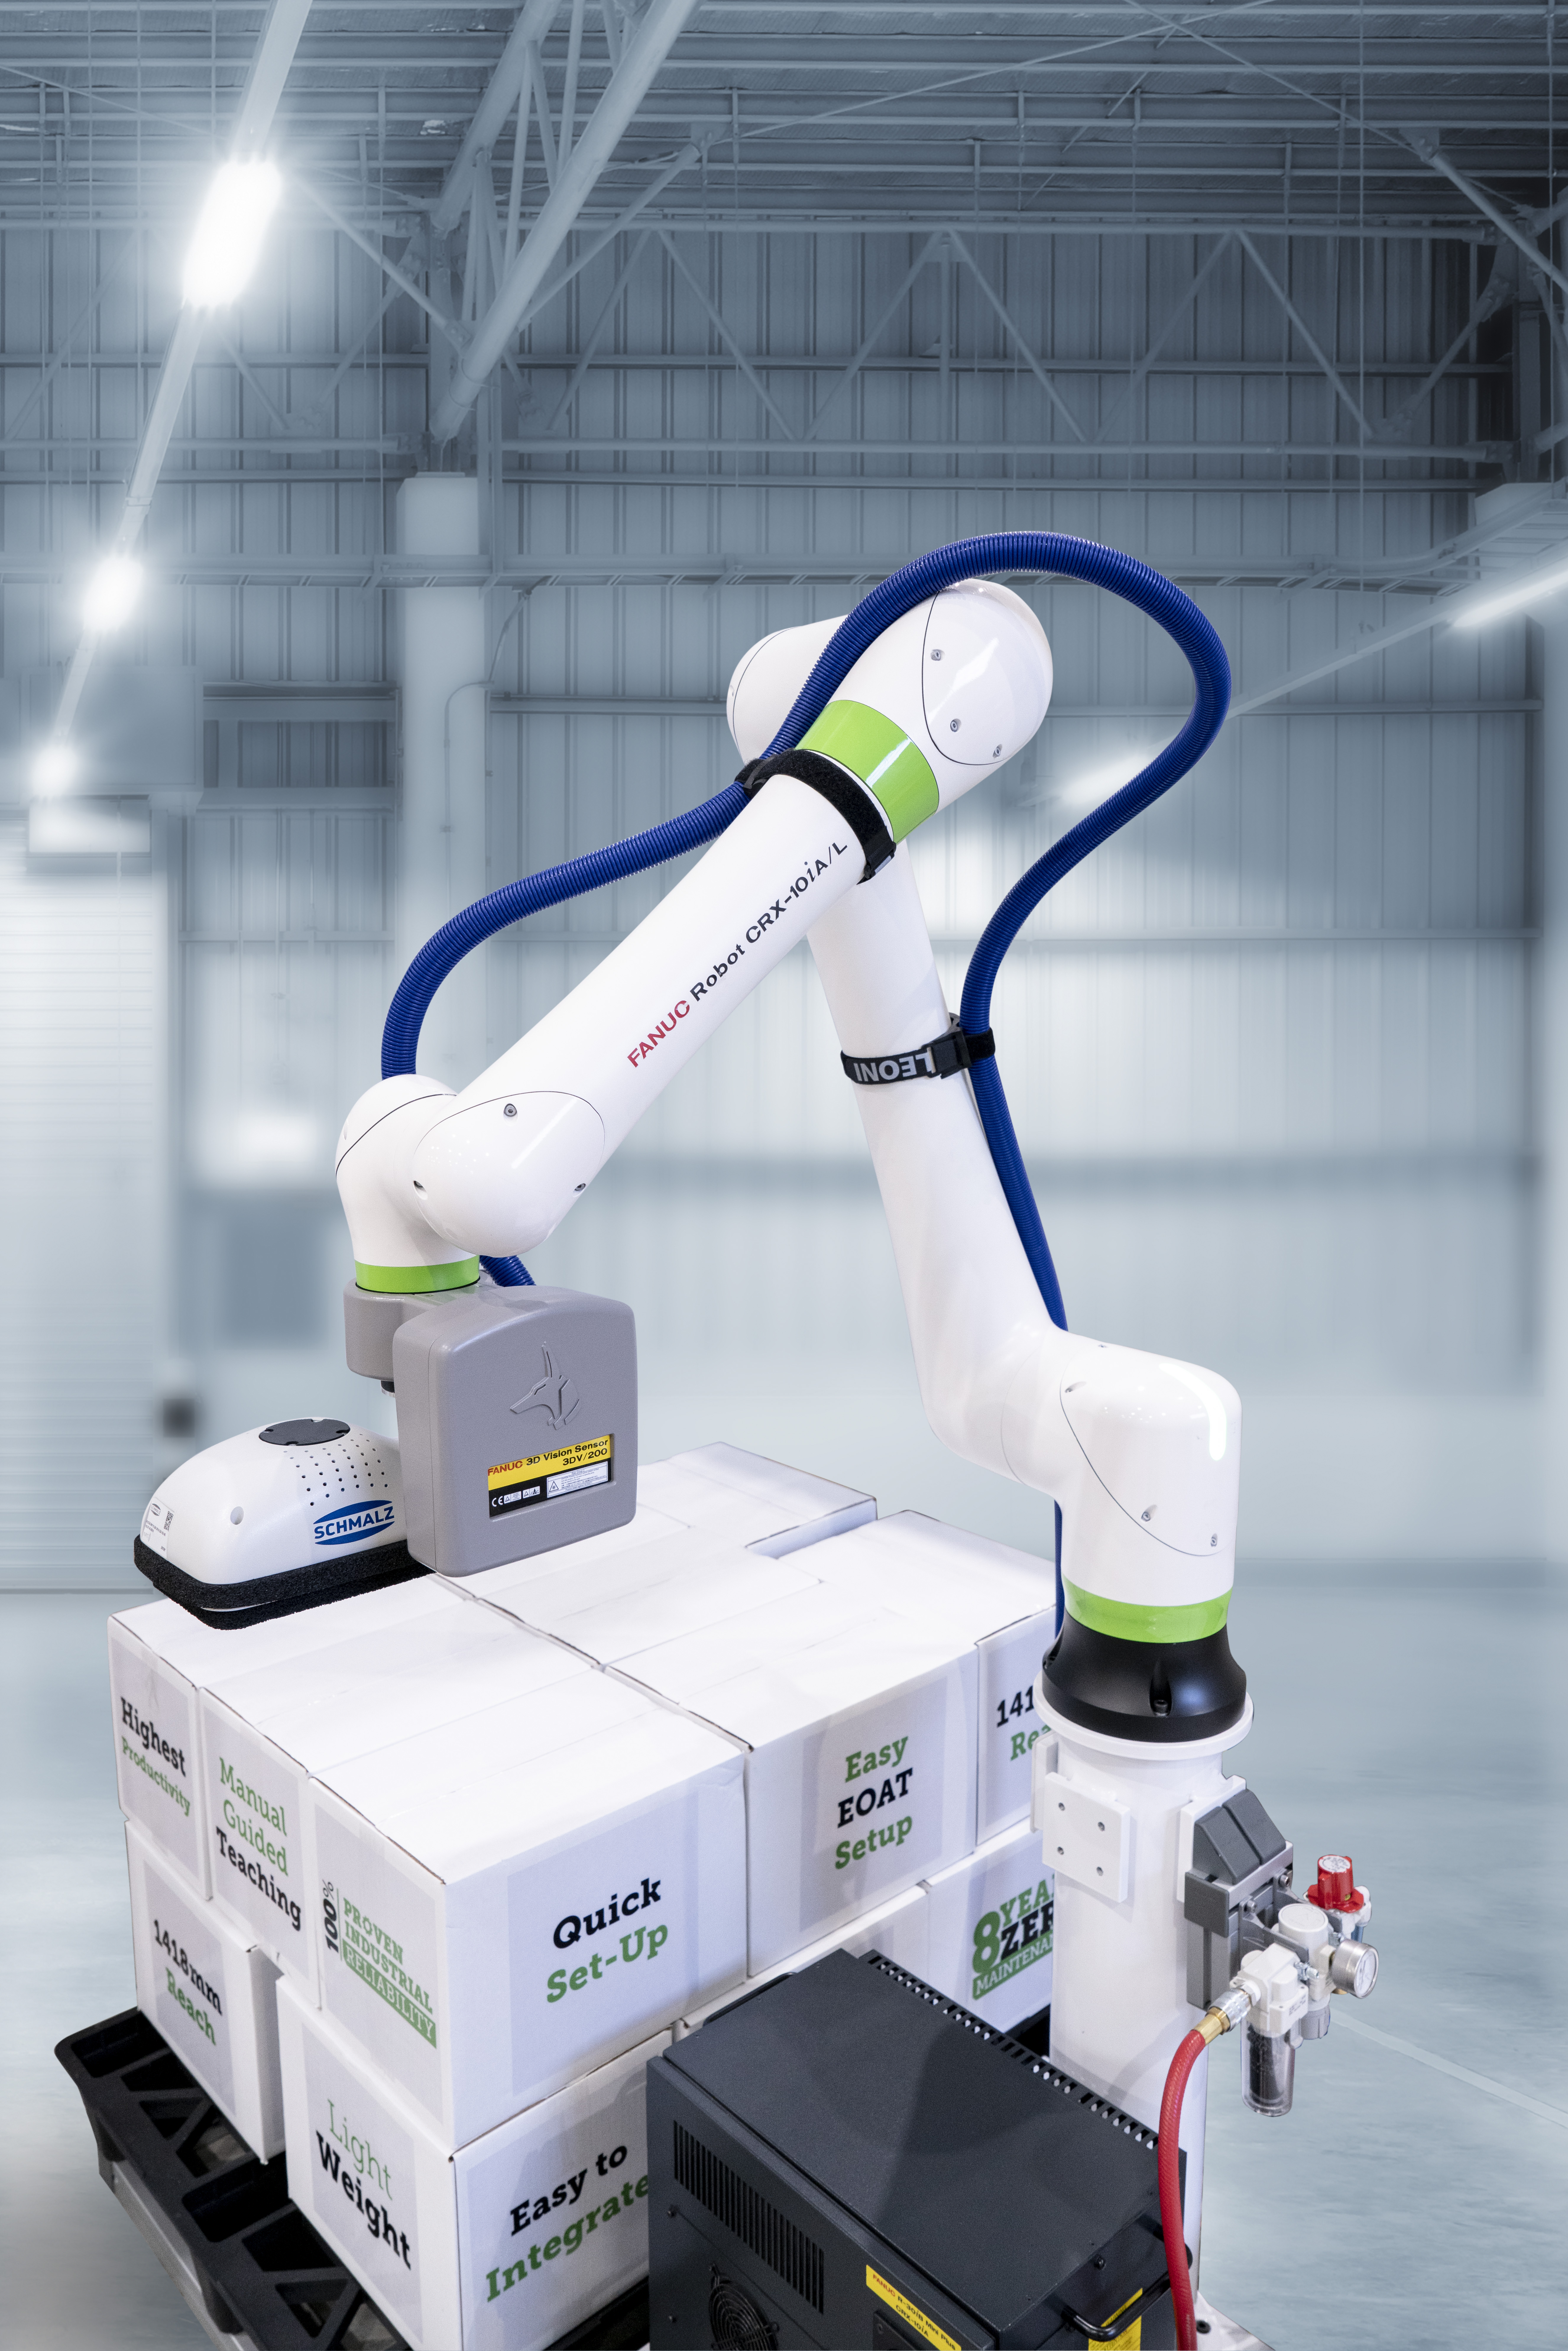 Collaborative robots are a great option for mundane tasks like assembly line work and pallet loading. The one shown here is equipped with a camera for greater flexibility. (Image courtesy of FANUC America Corporation)